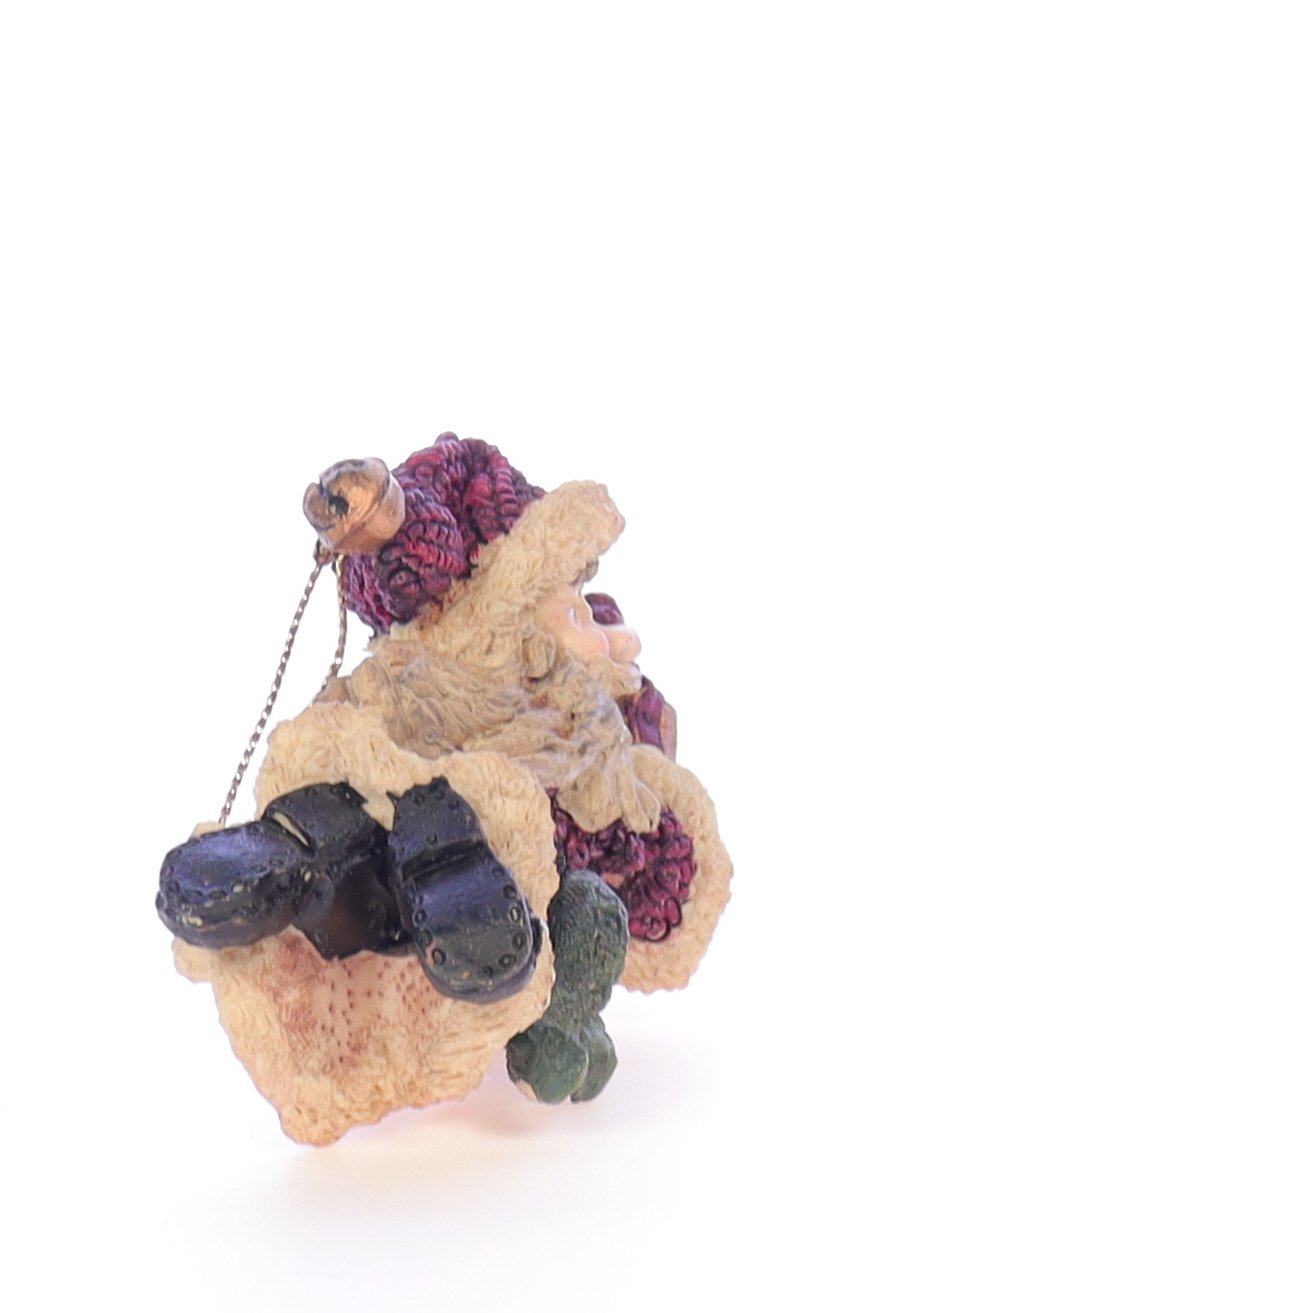 Boyds_Bears_Folkstone_Resin_Figurine_Nicholas_the_Giftgiver_2551_07